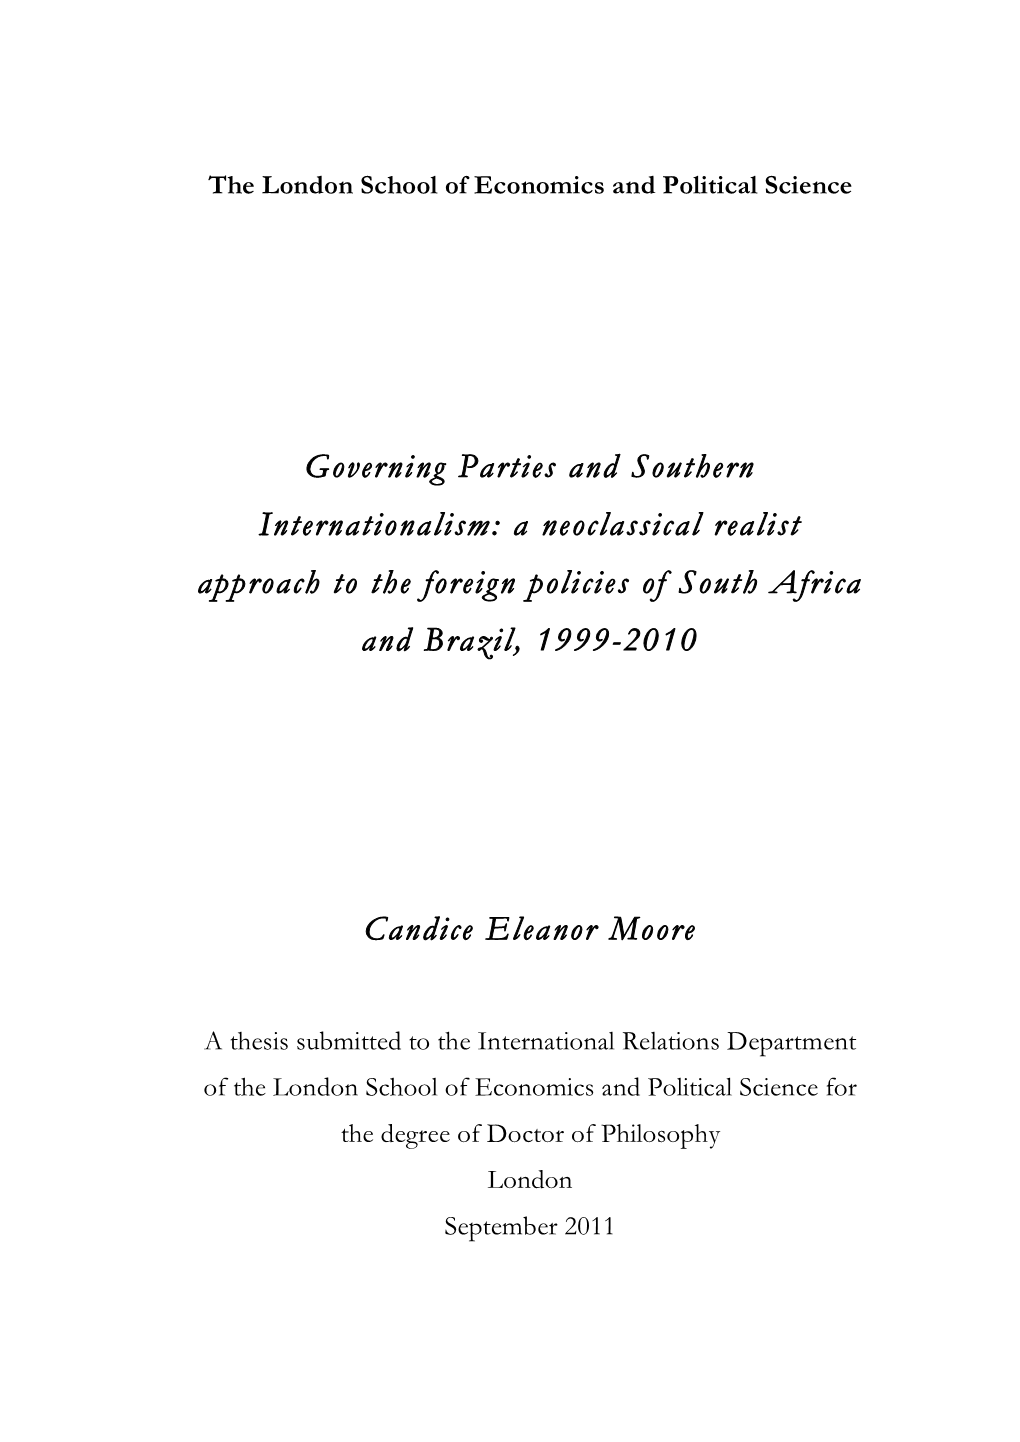 Governing Parties and Southern Internationalism: a Neoclassical Realist Approach to the Foreign Policies of South Africa and Brazil, 1999-2010